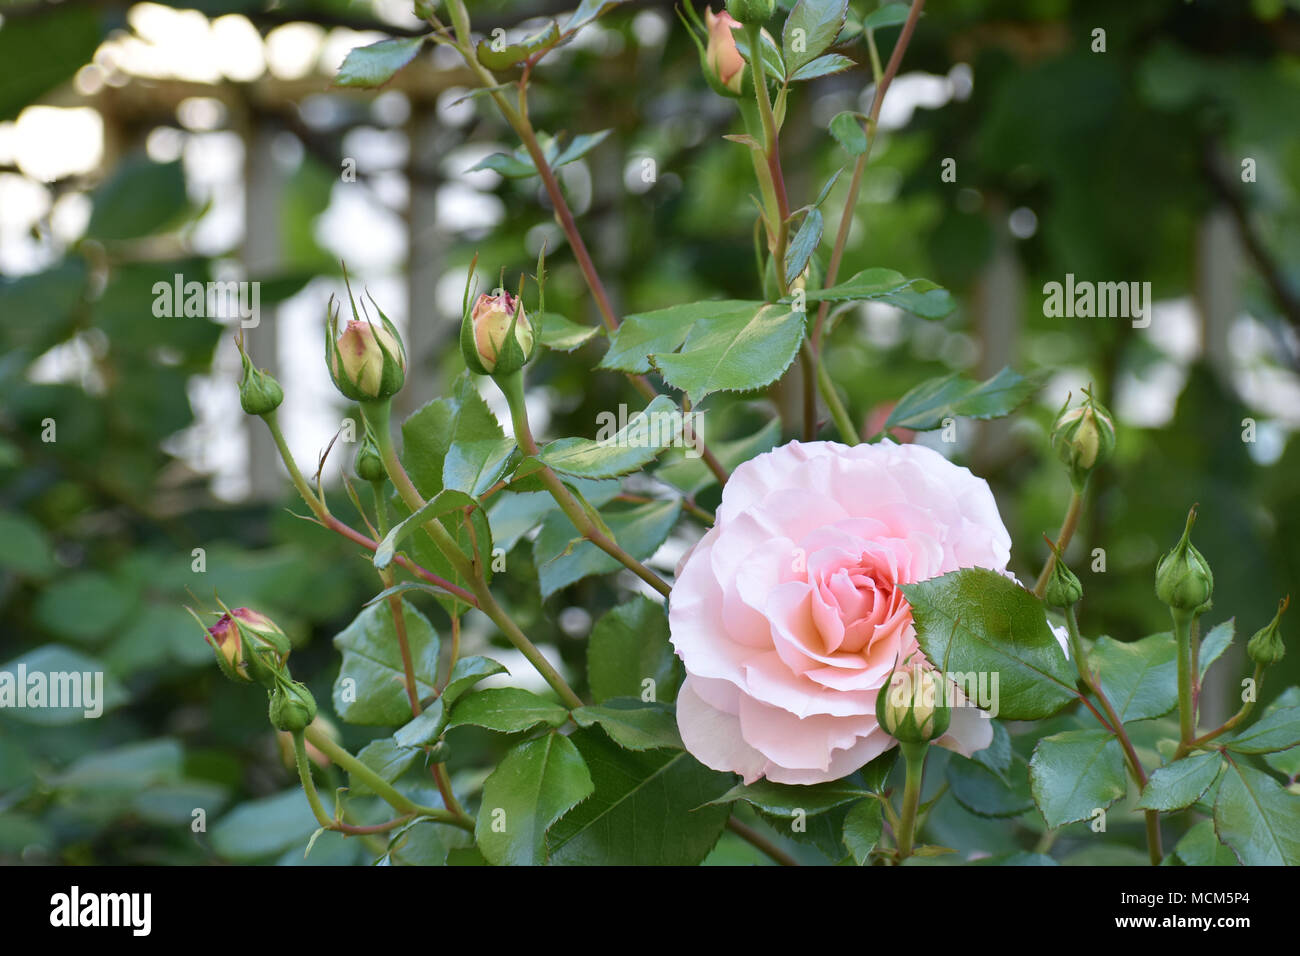 Light Pink Rose Surrounded by Buds Stock Photo